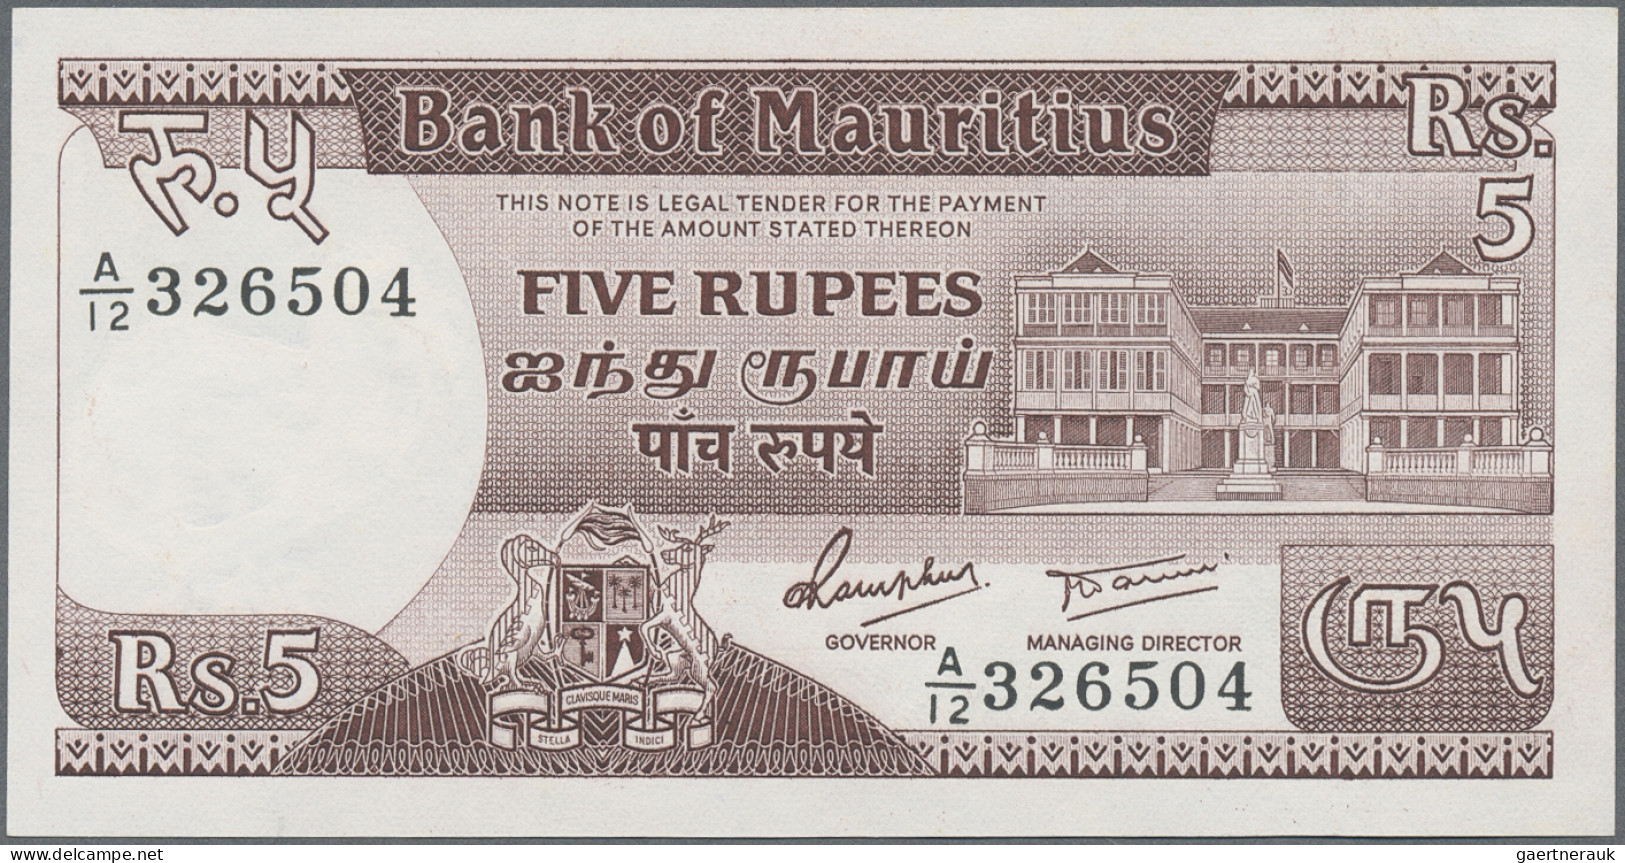 Mauritius: Bank Of Mauritius, Lot With 5 Banknotes, Series 1985/86, With 5 Rupee - Maurice